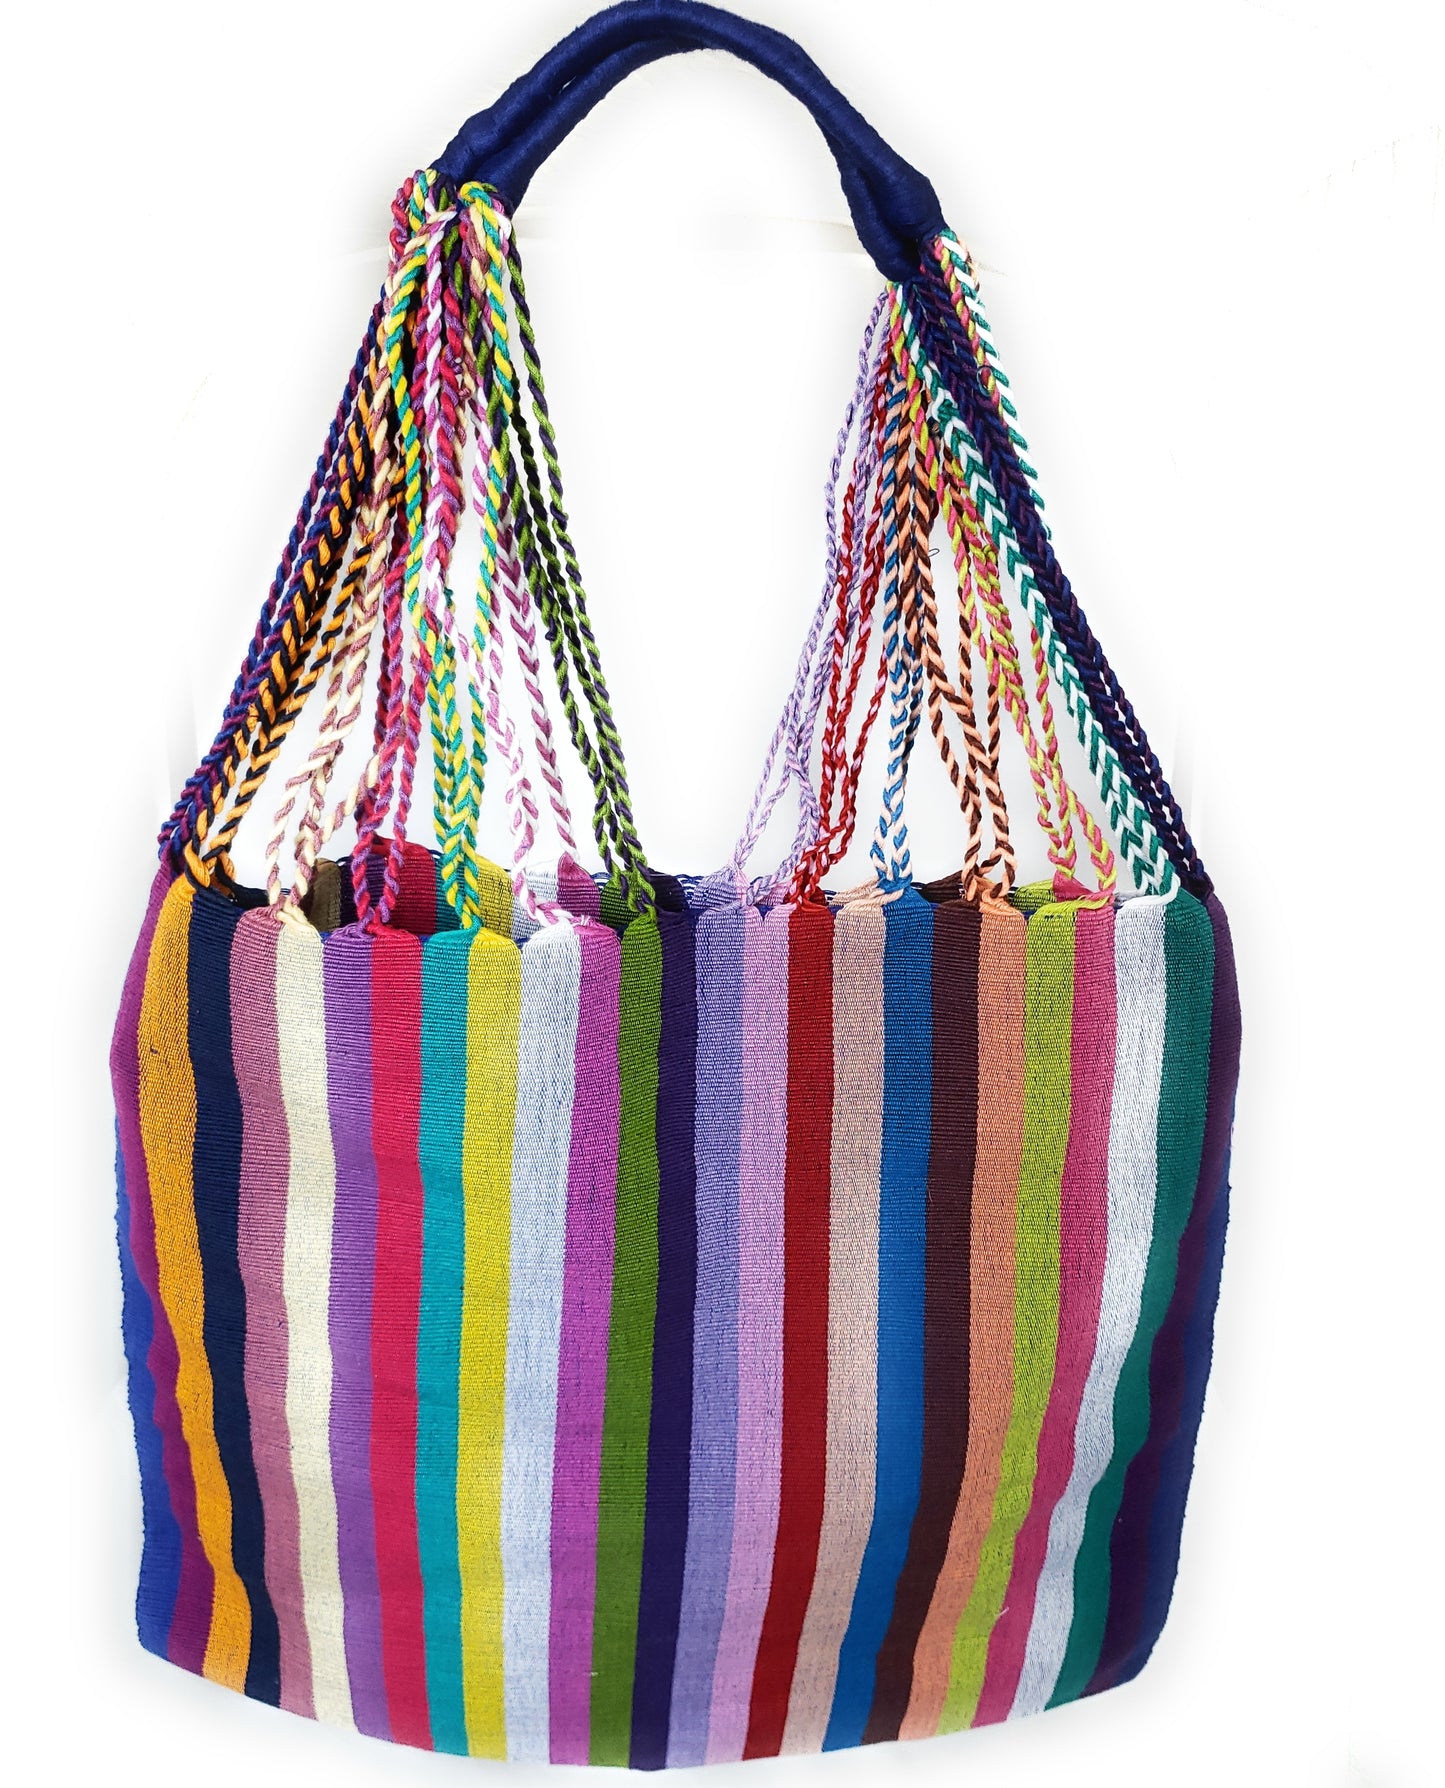 Mexican Striped Woven Tote Bag Women's Handmade